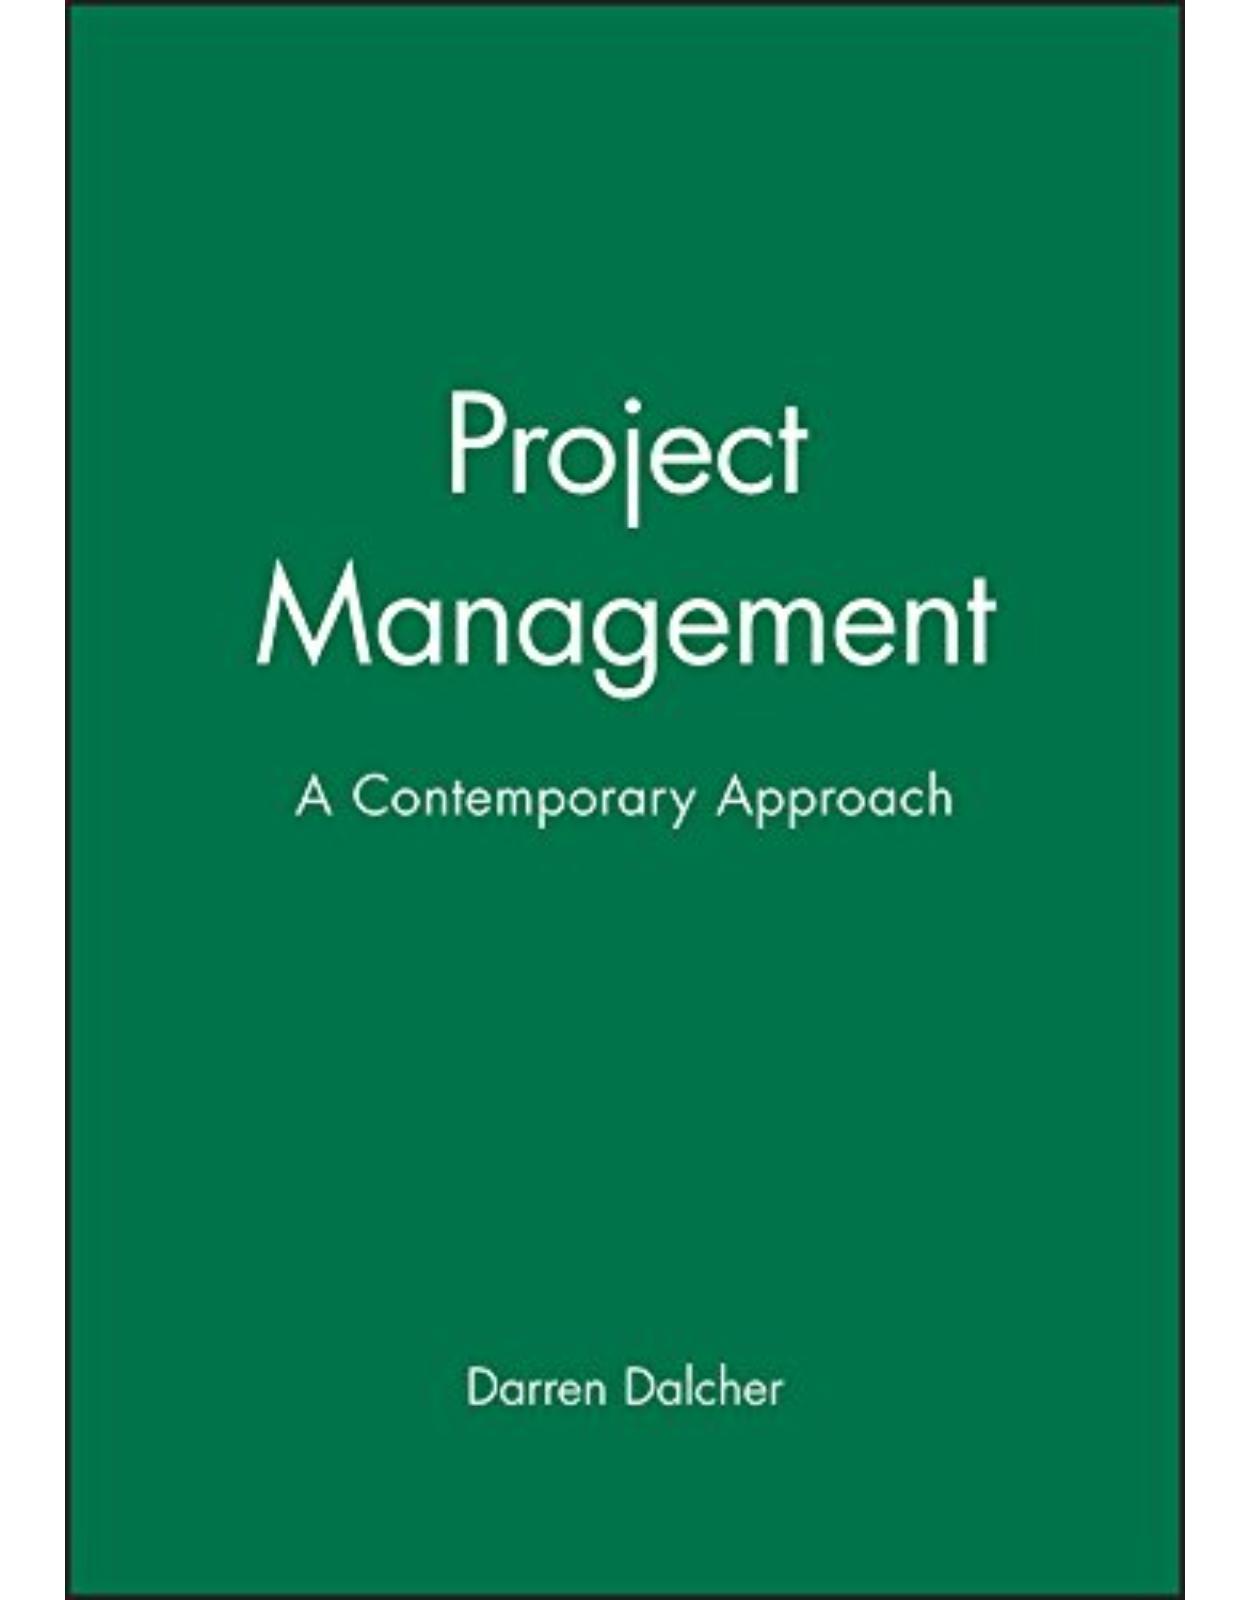 Project Management: A Contemporary Approach